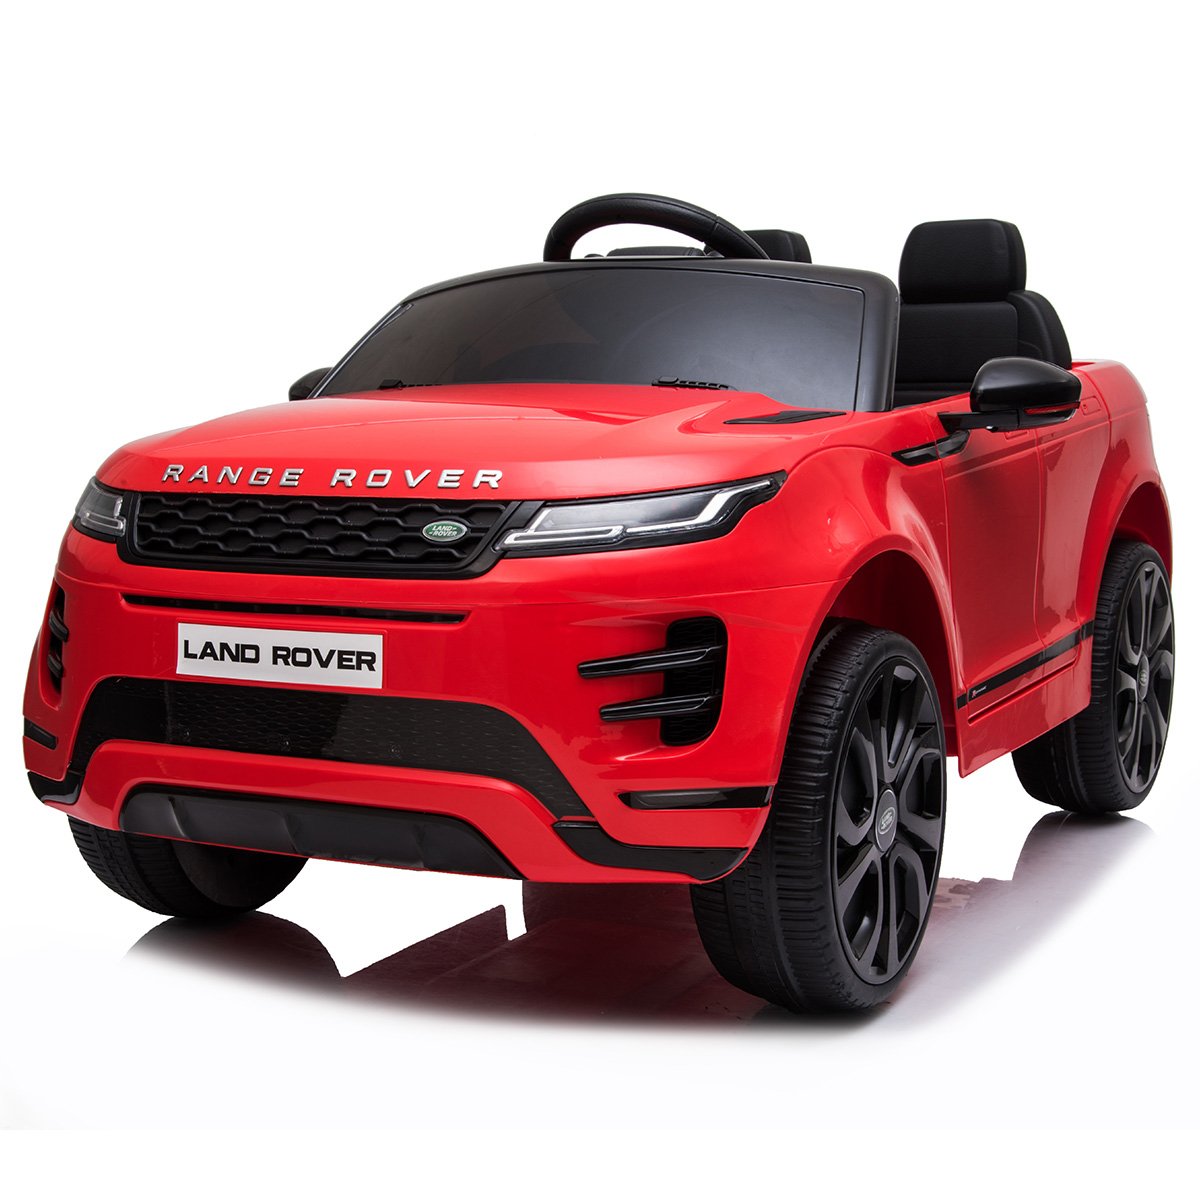 Land Rover Licensed Kids Electric Ride On Car Remote Control - Red 2